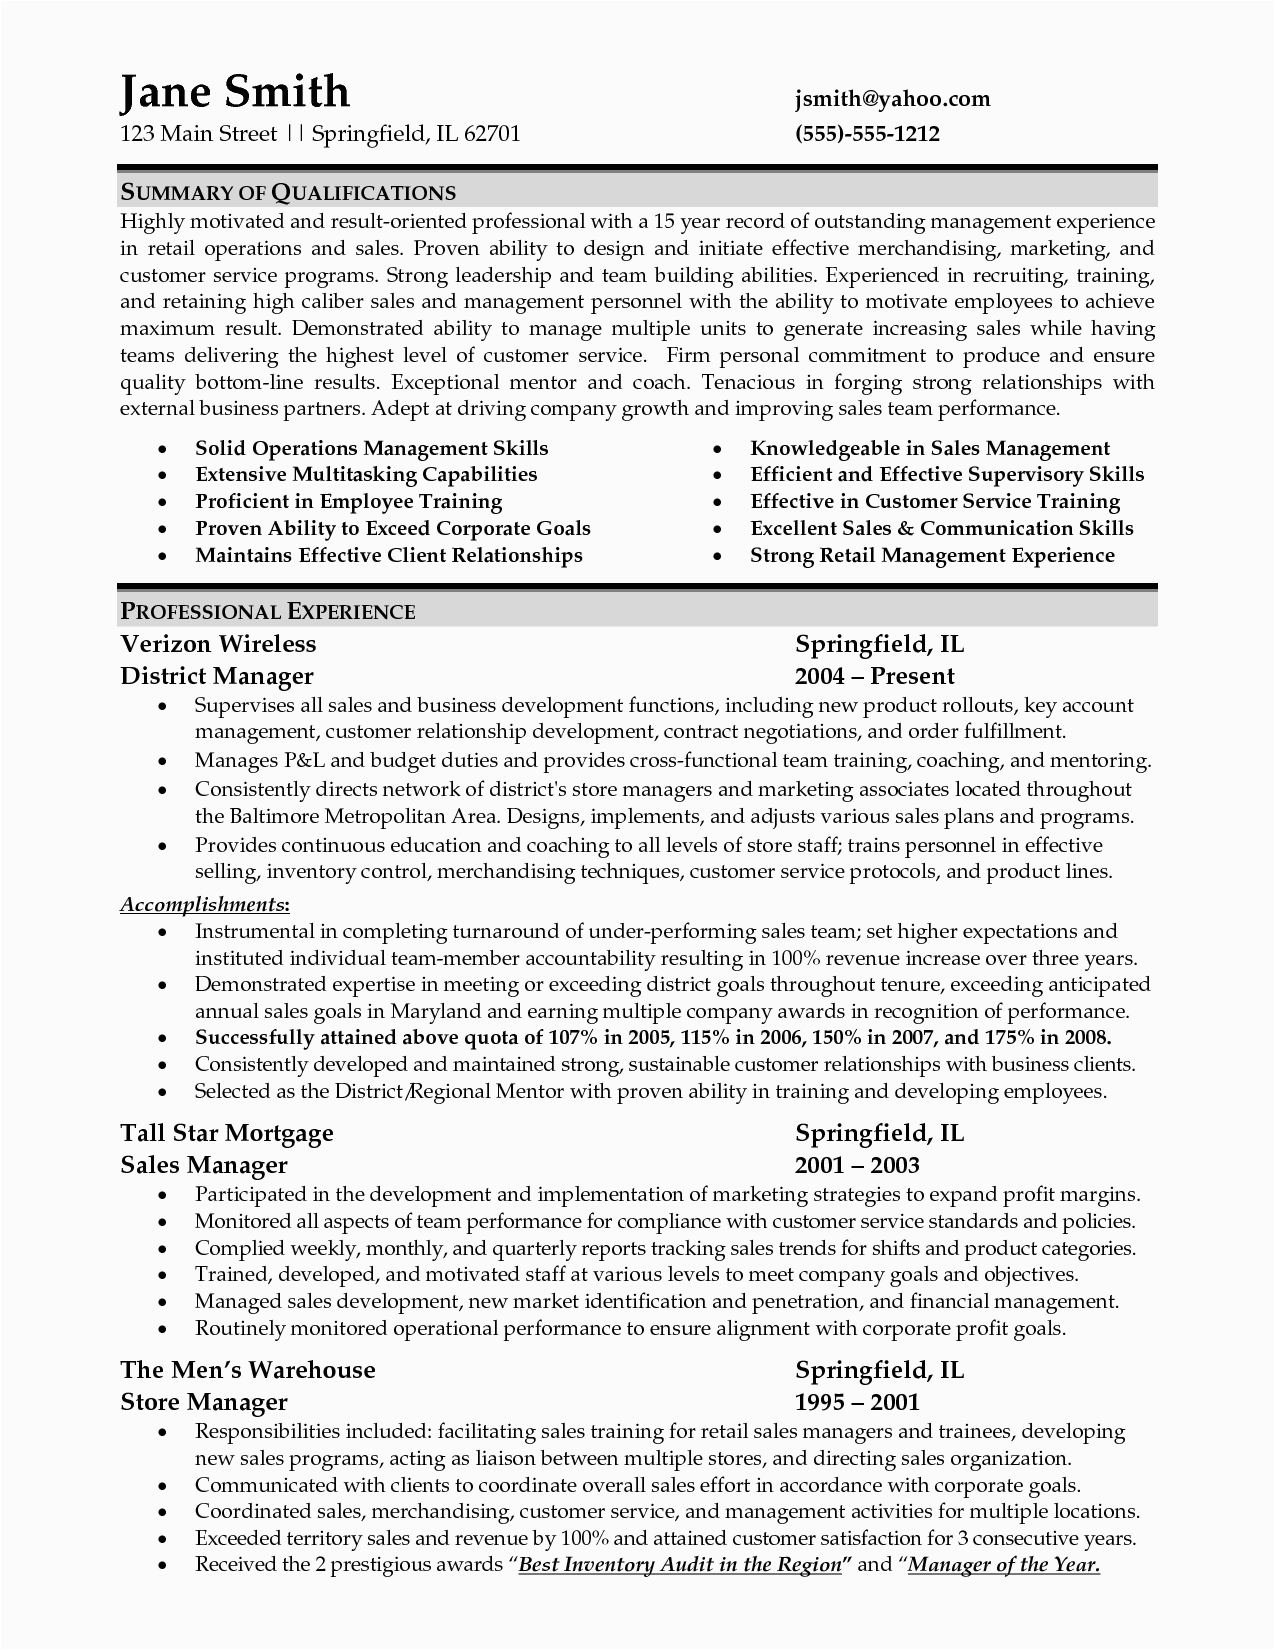 Resume Samples for Retail Management Position Sample Resume for Retail Management Job